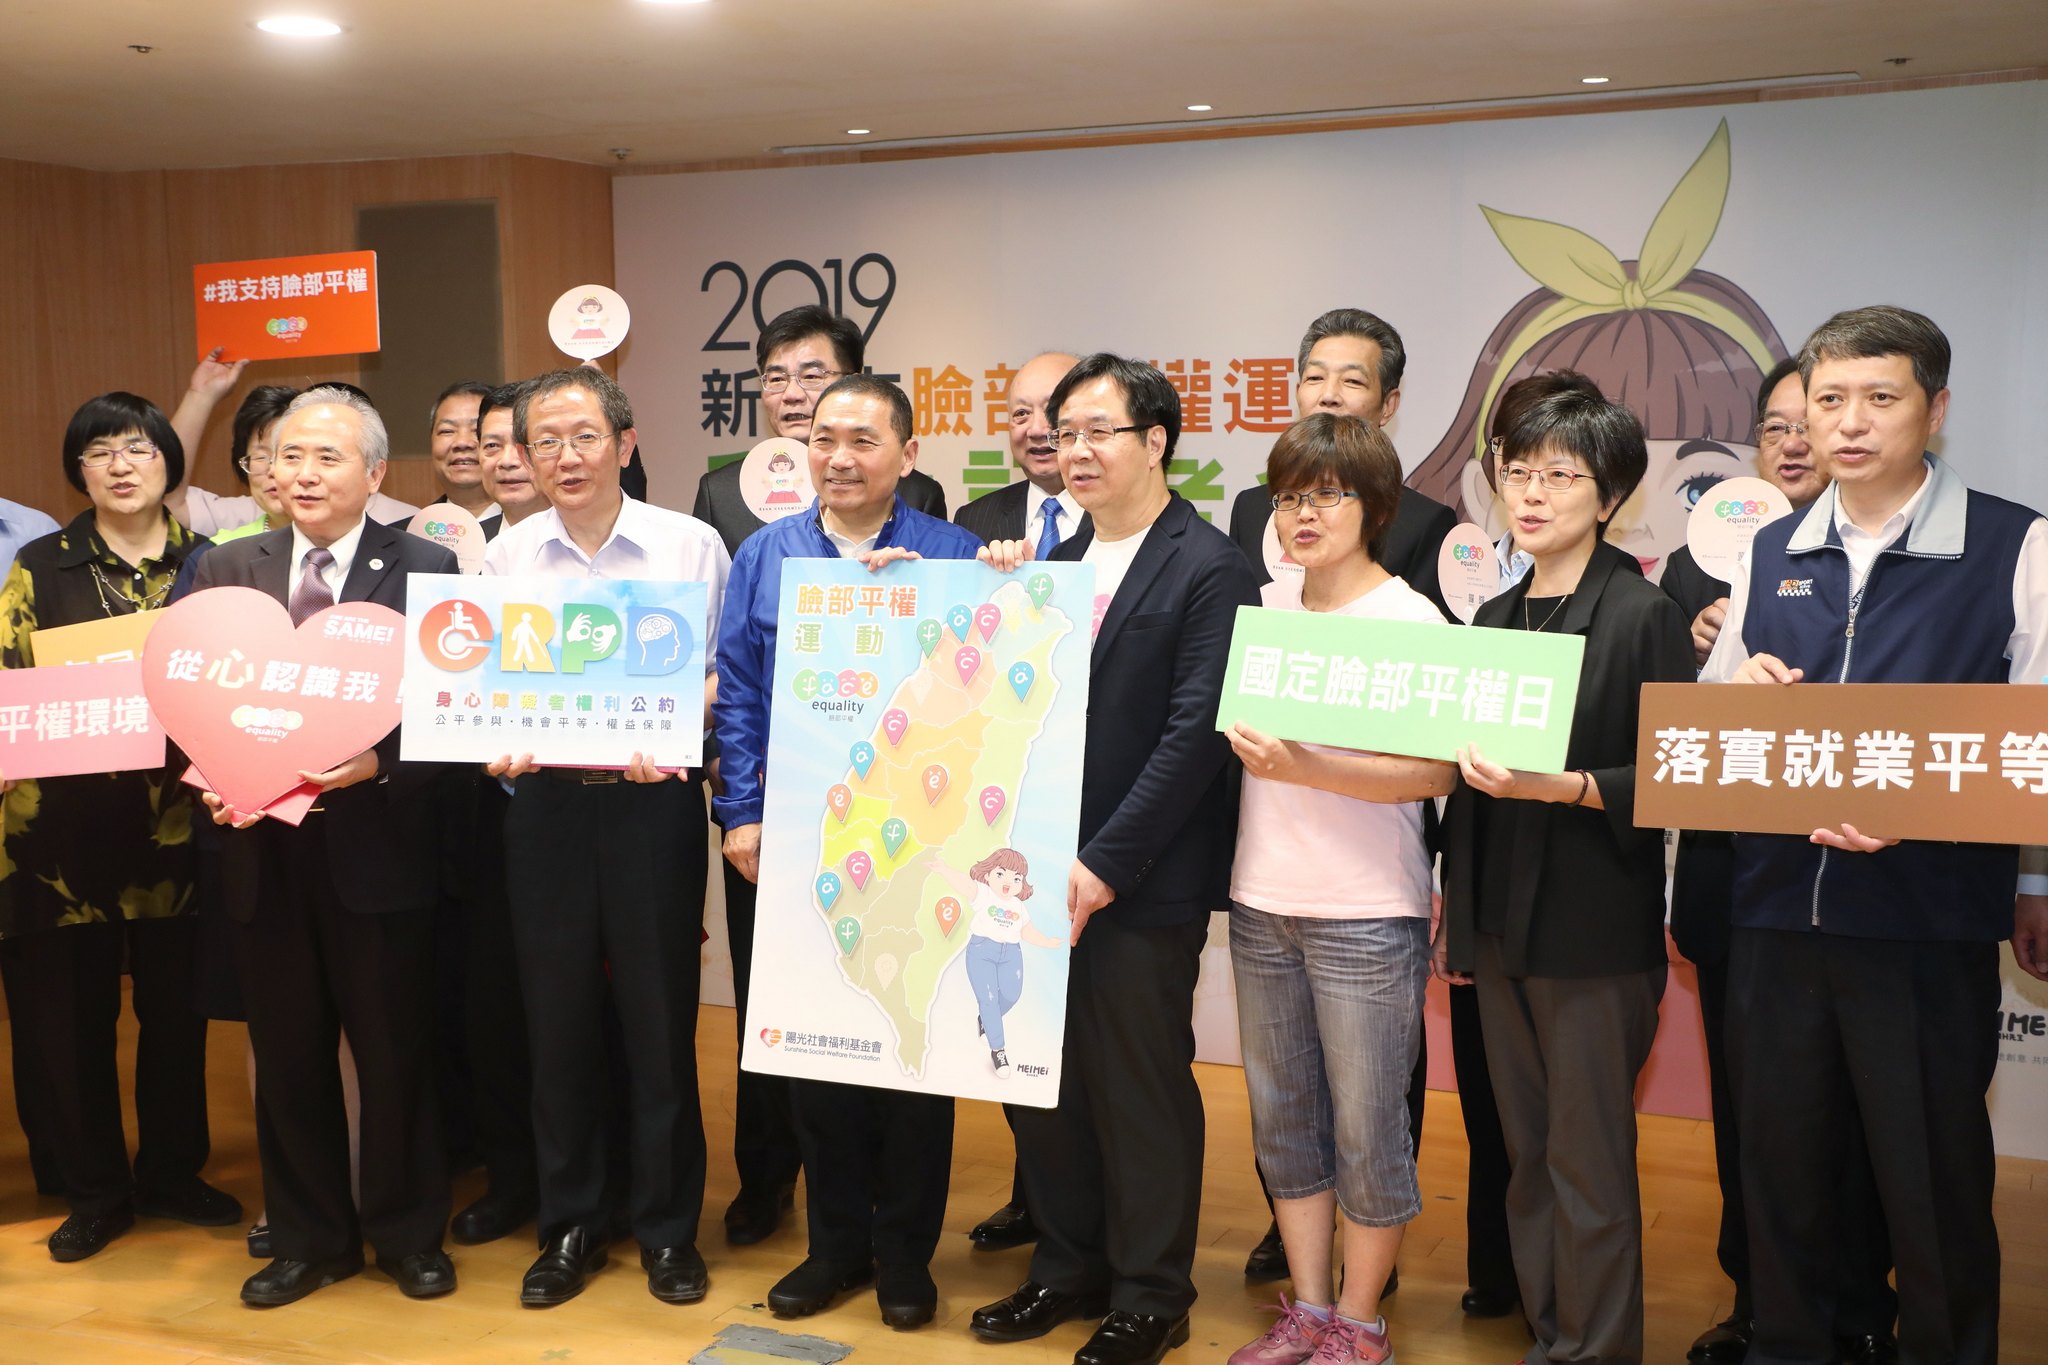 New Taipei City Face Equality